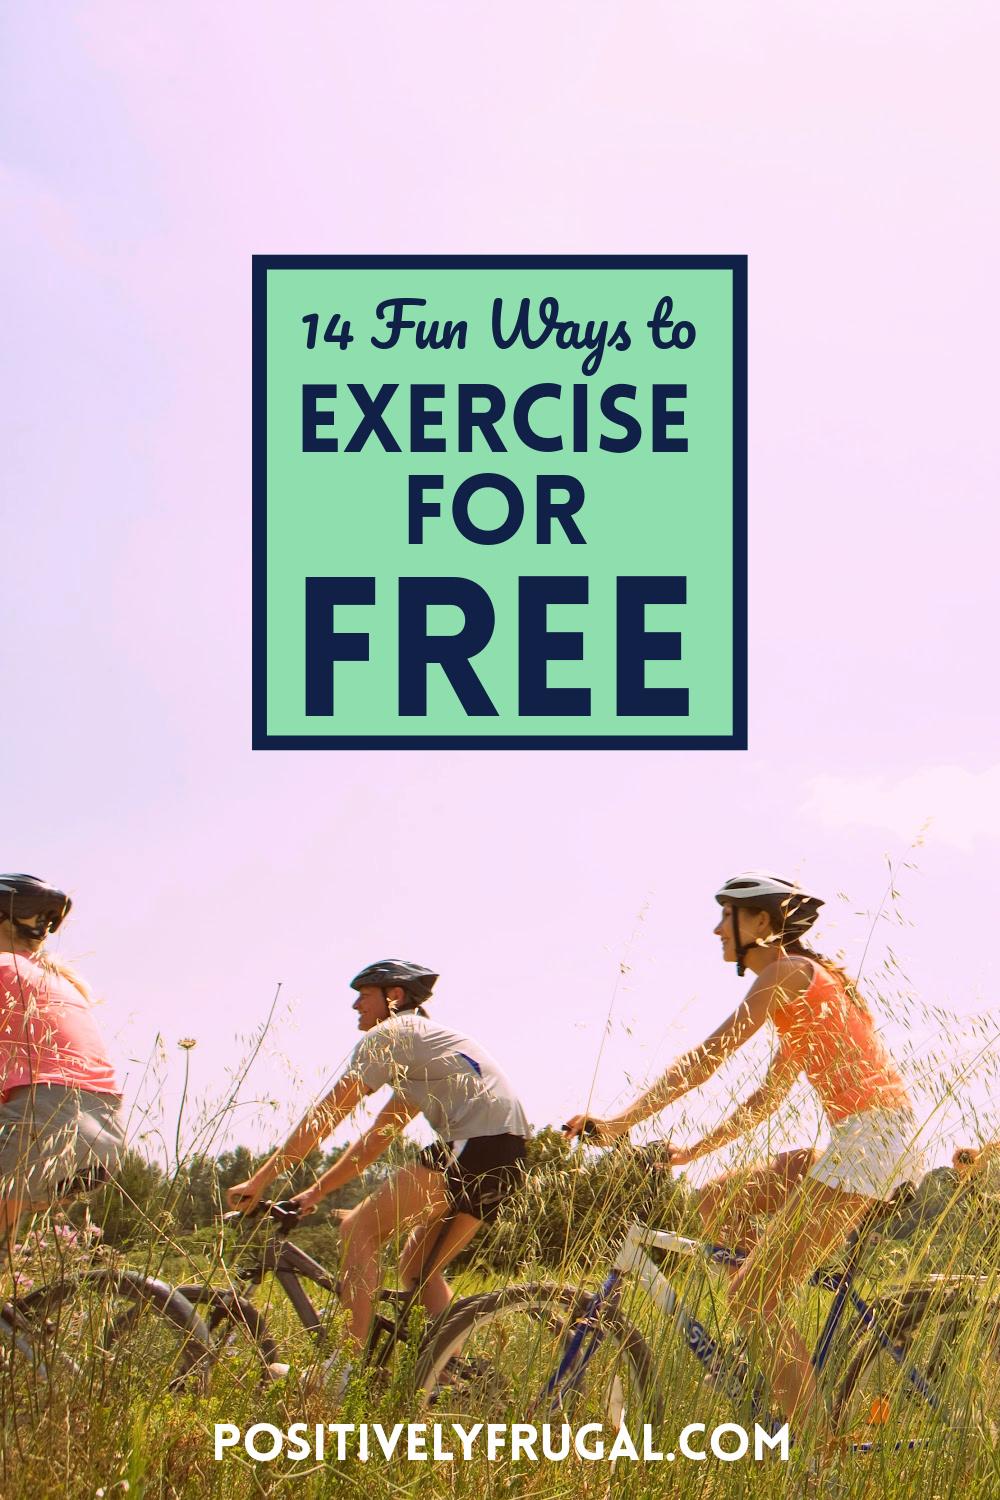 Ways To Exercise for Free by PositivelyFrugal.com